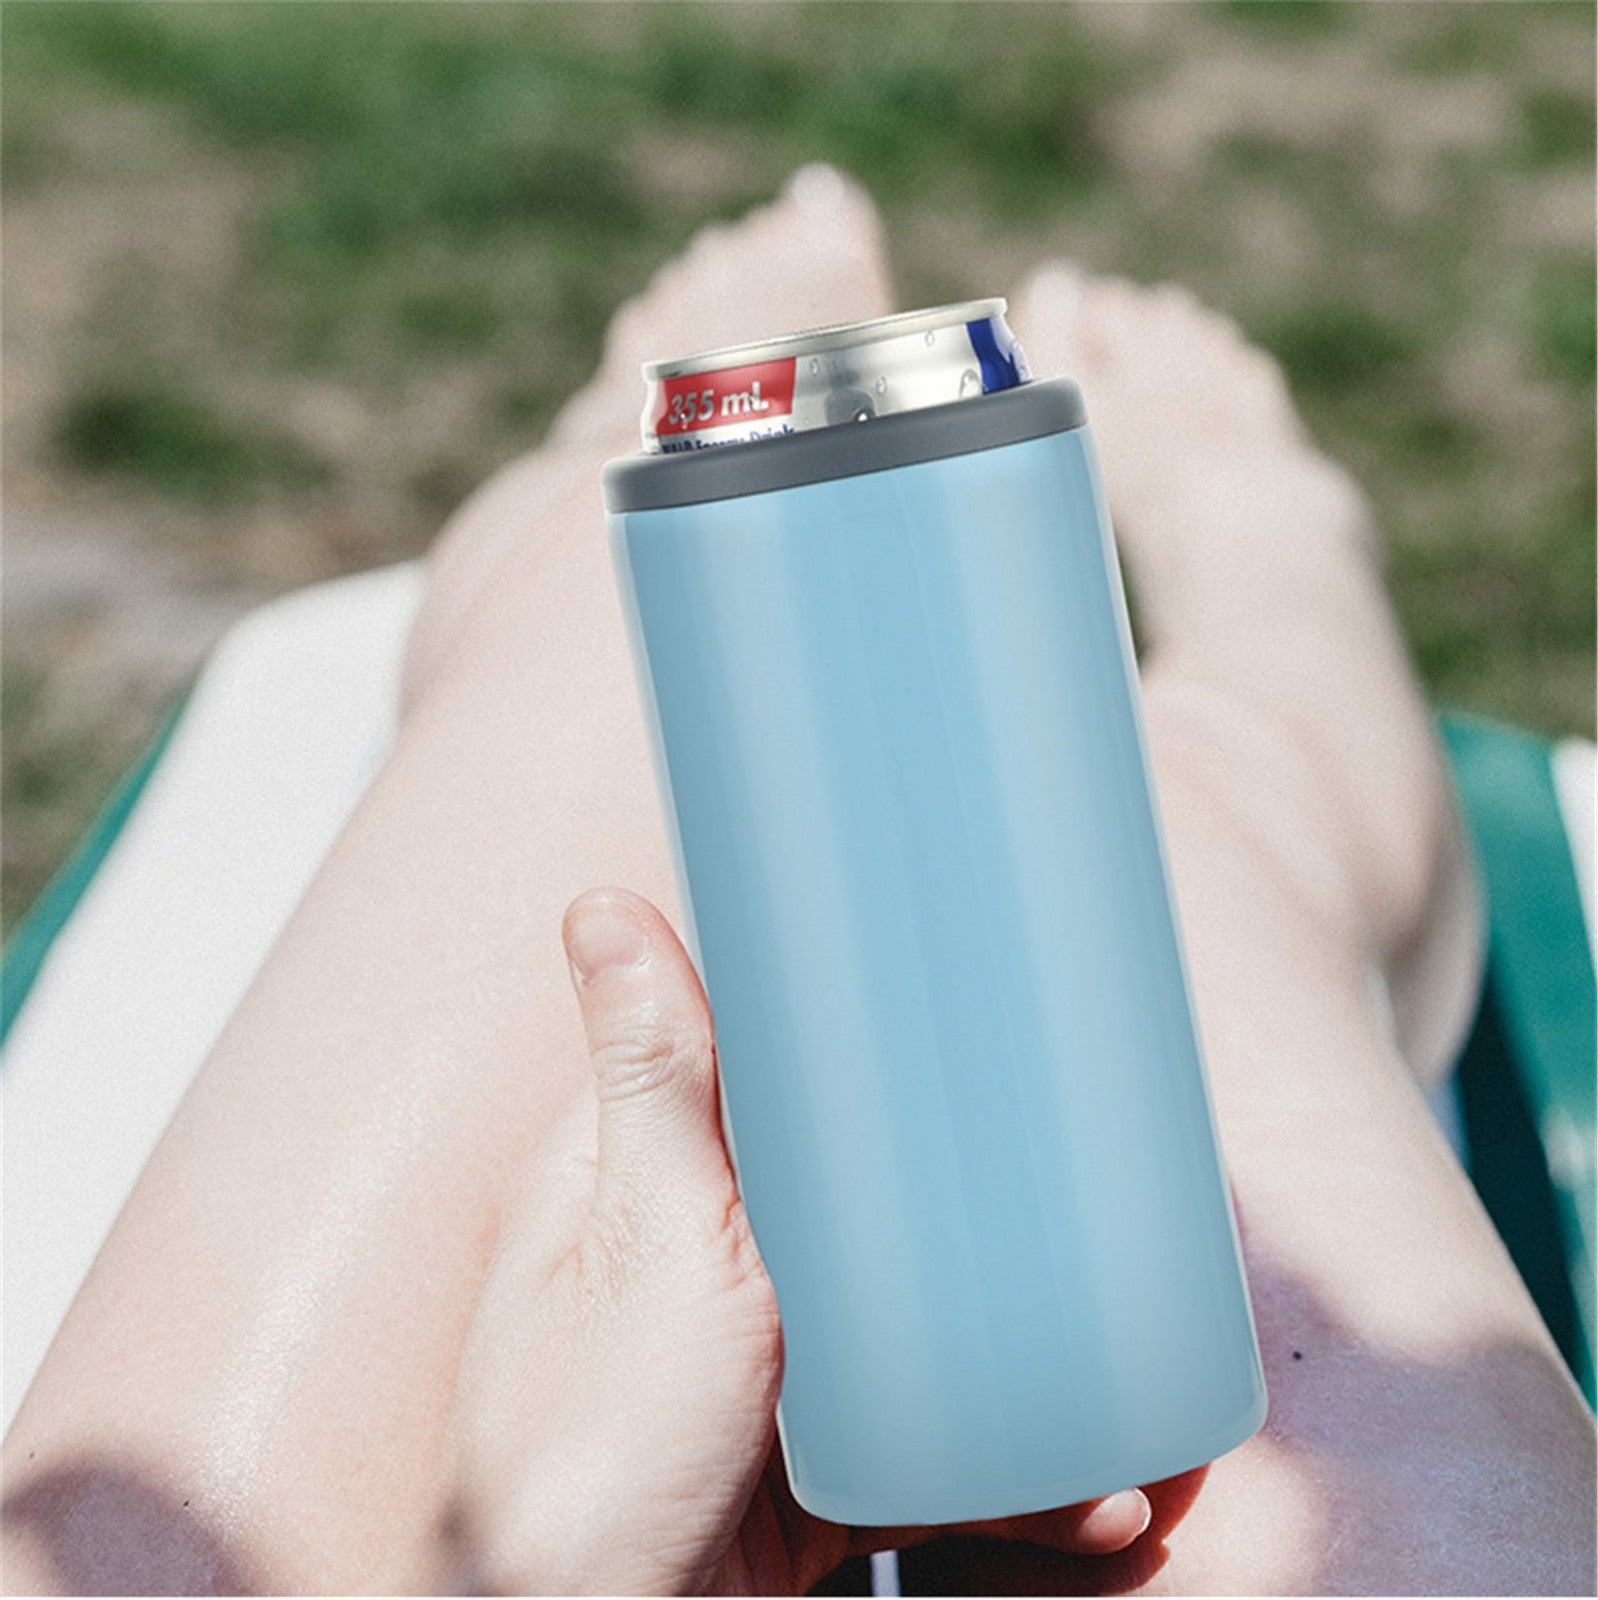 Stainless Steel Can Cooler - Find Epic Store